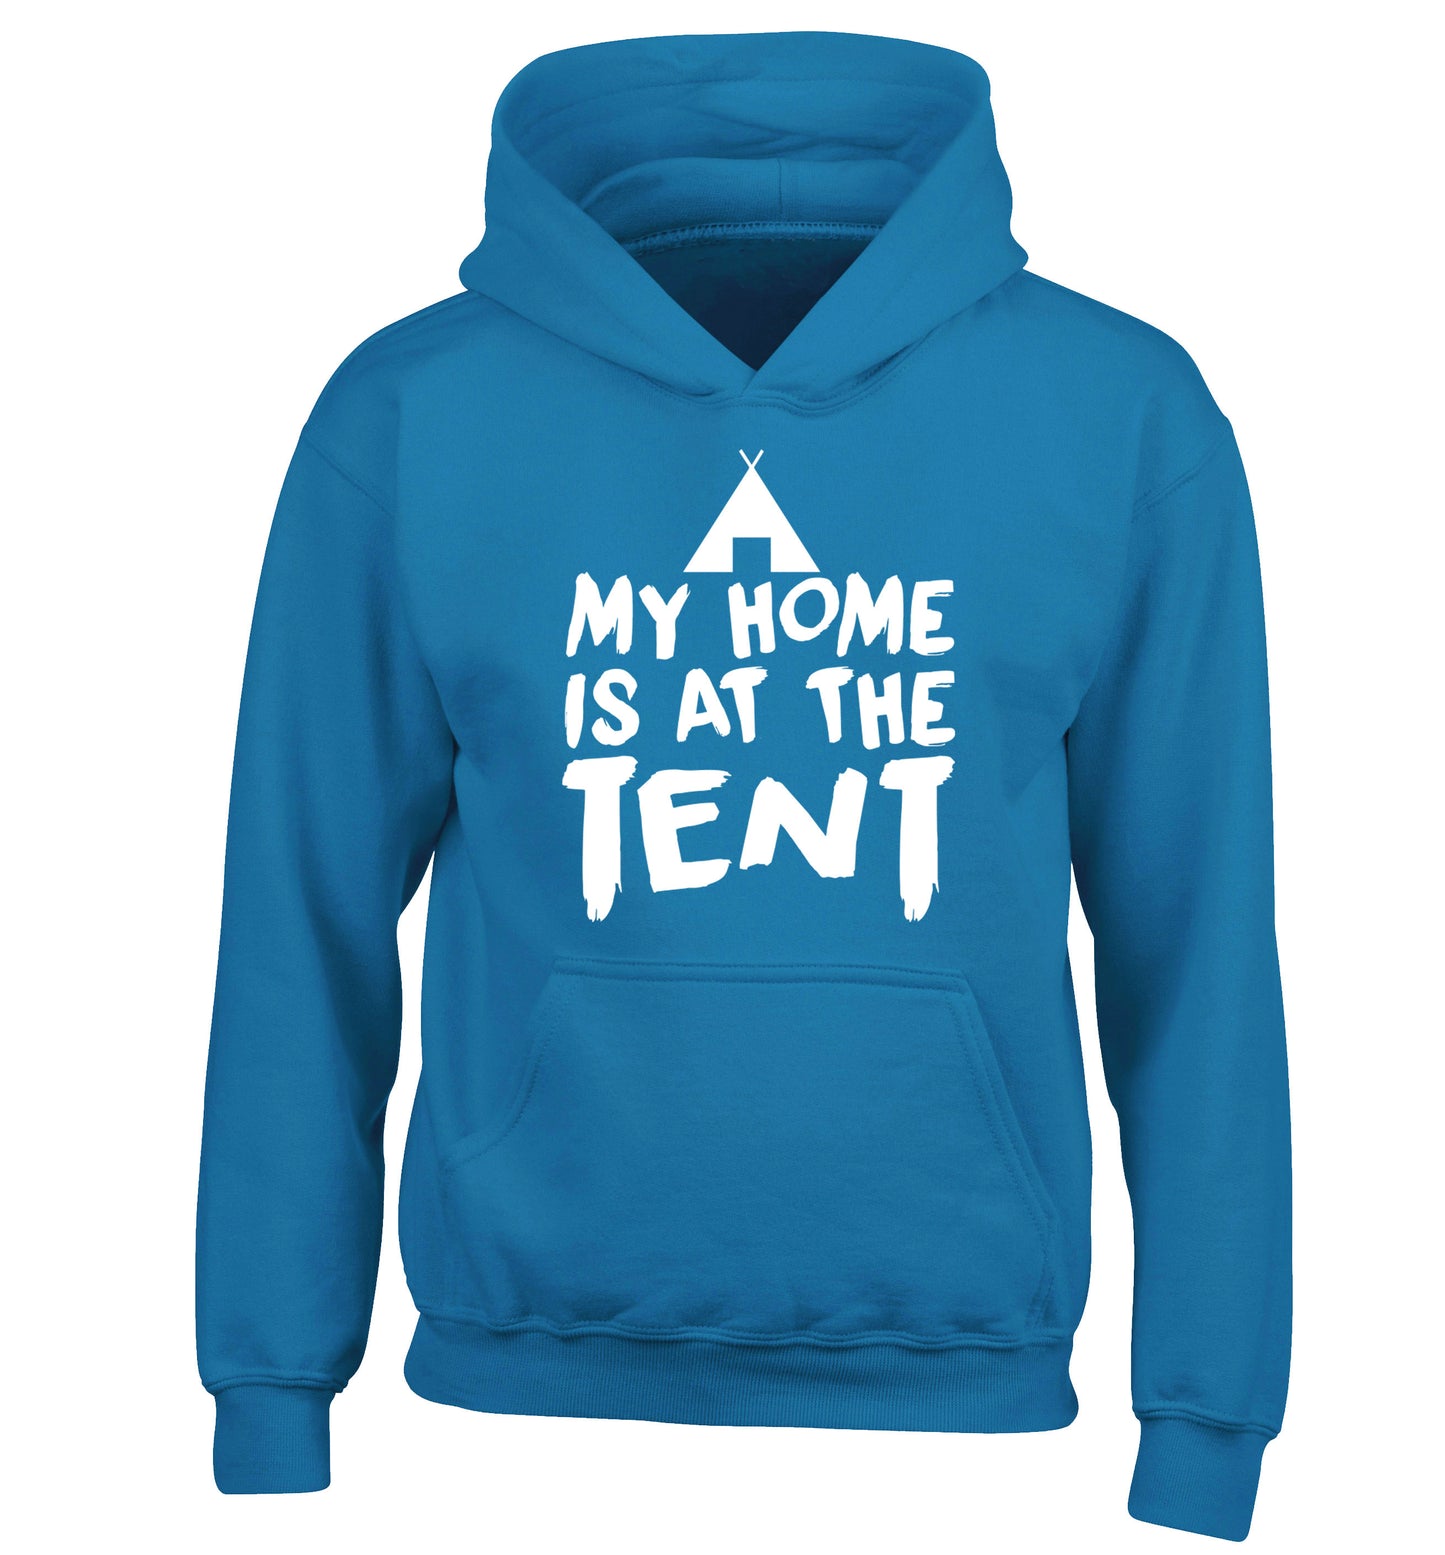 My home is at the tent children's blue hoodie 12-14 Years